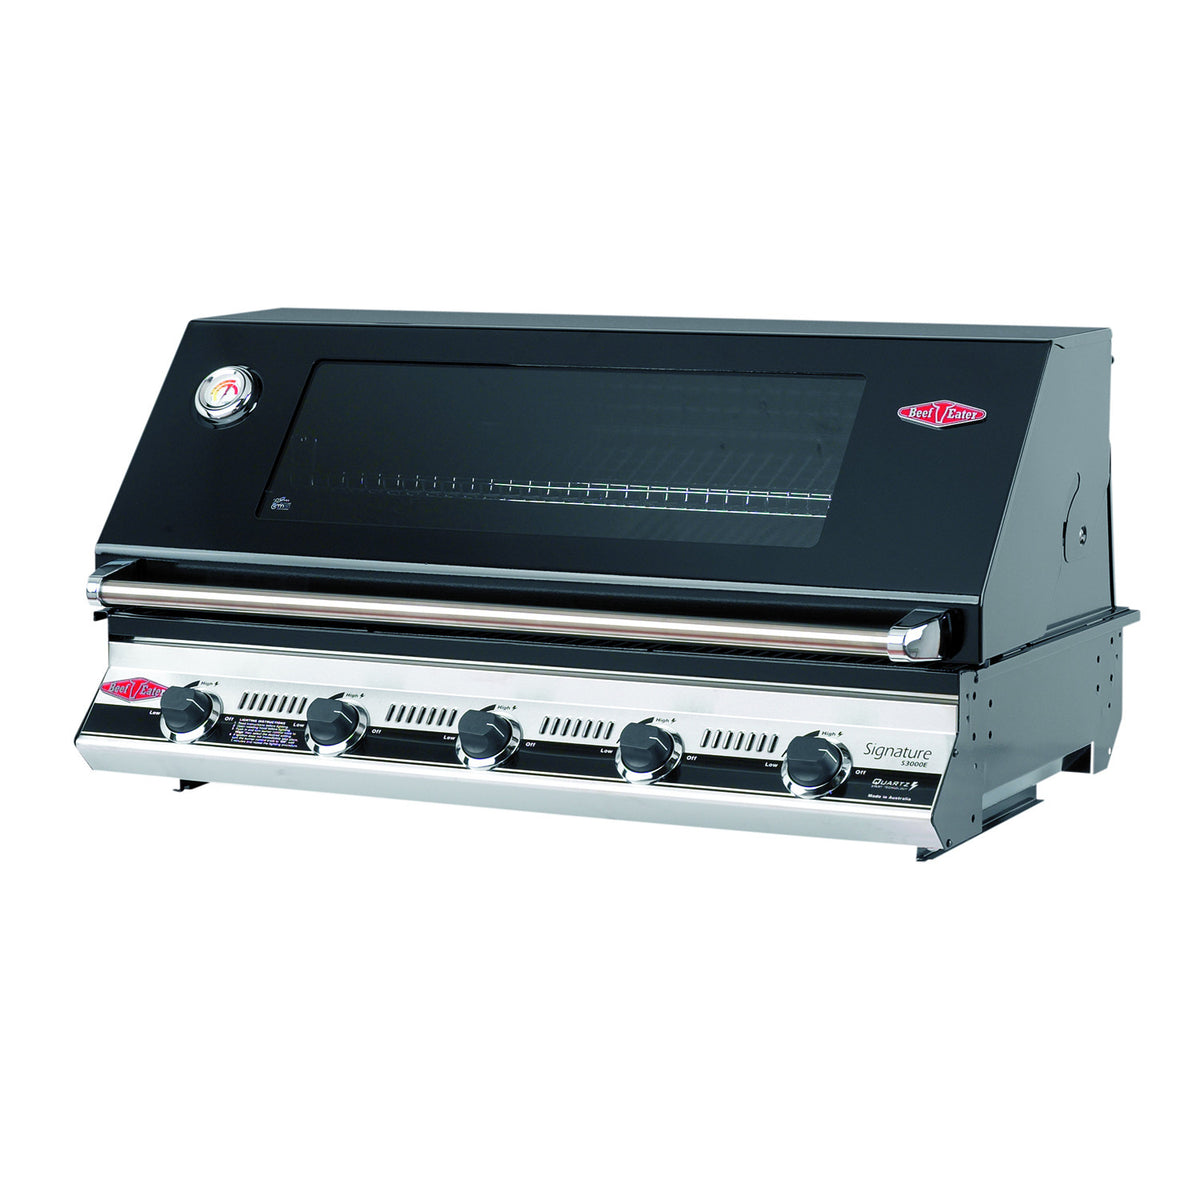 BeefEater Signature S3000E Series 5 Burner Build-in Gas Barbecue